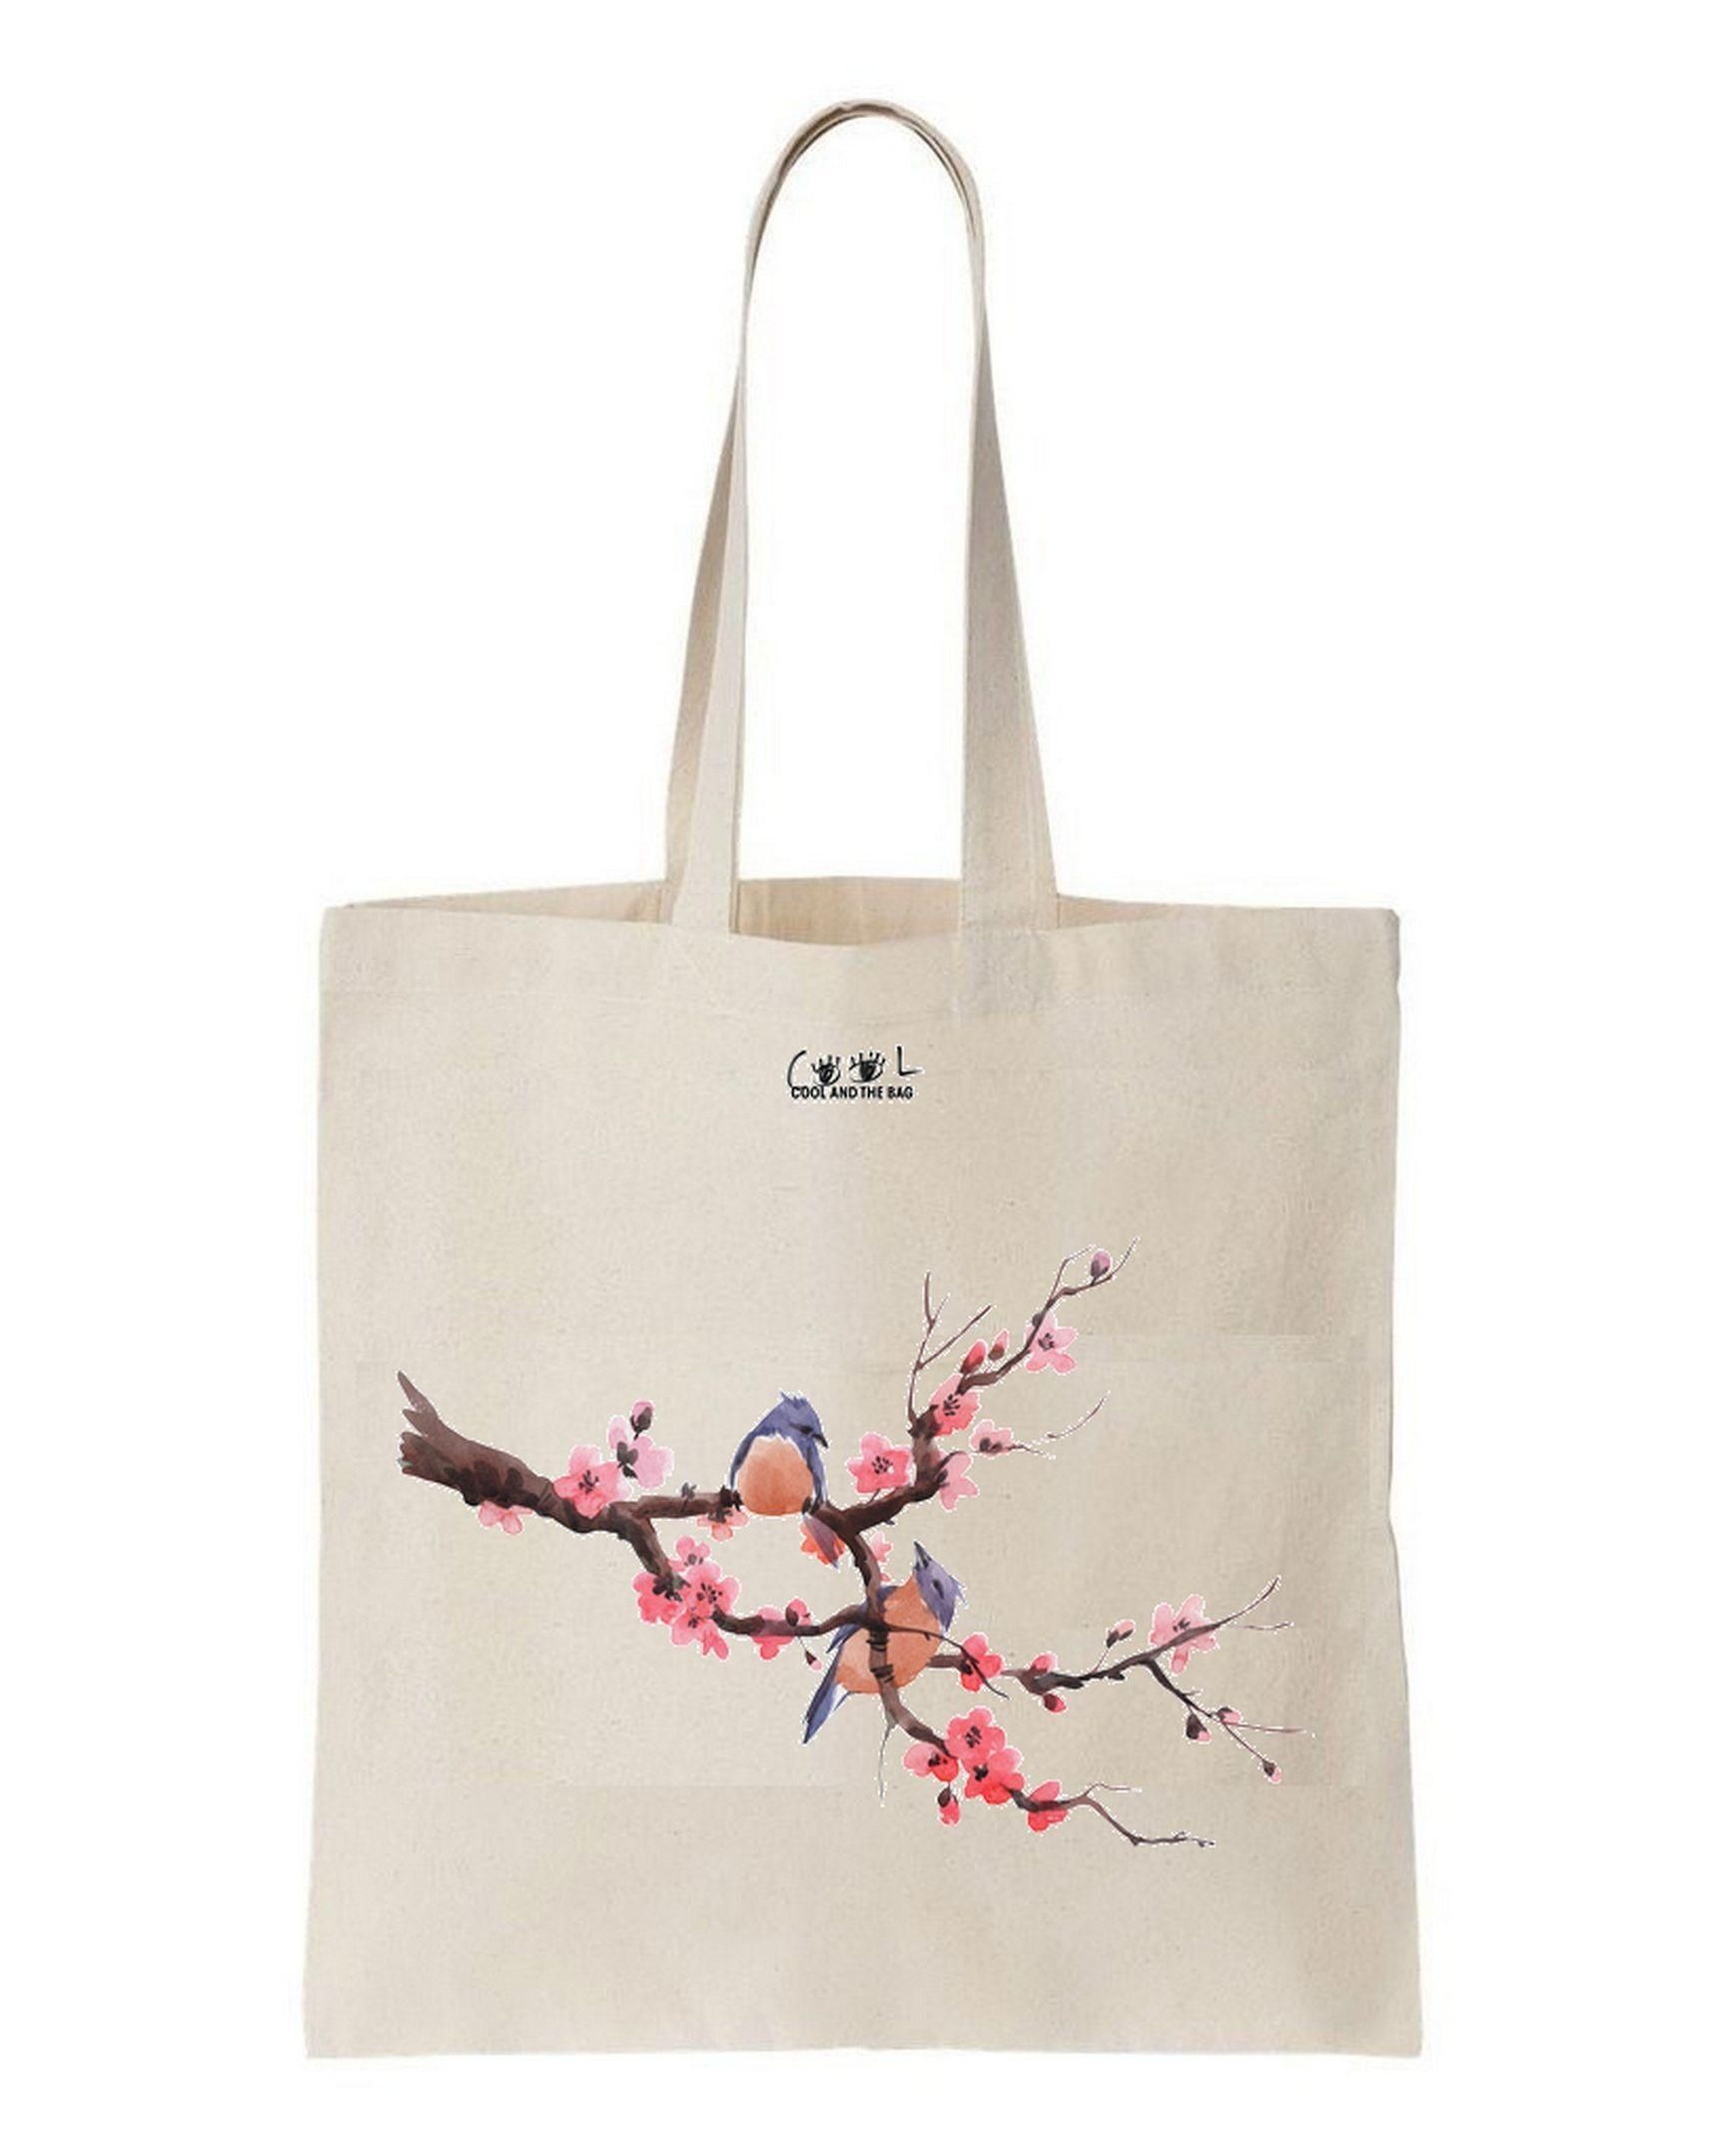 Awesome Blossom Birds Printed Tote Bag Gift For Girls